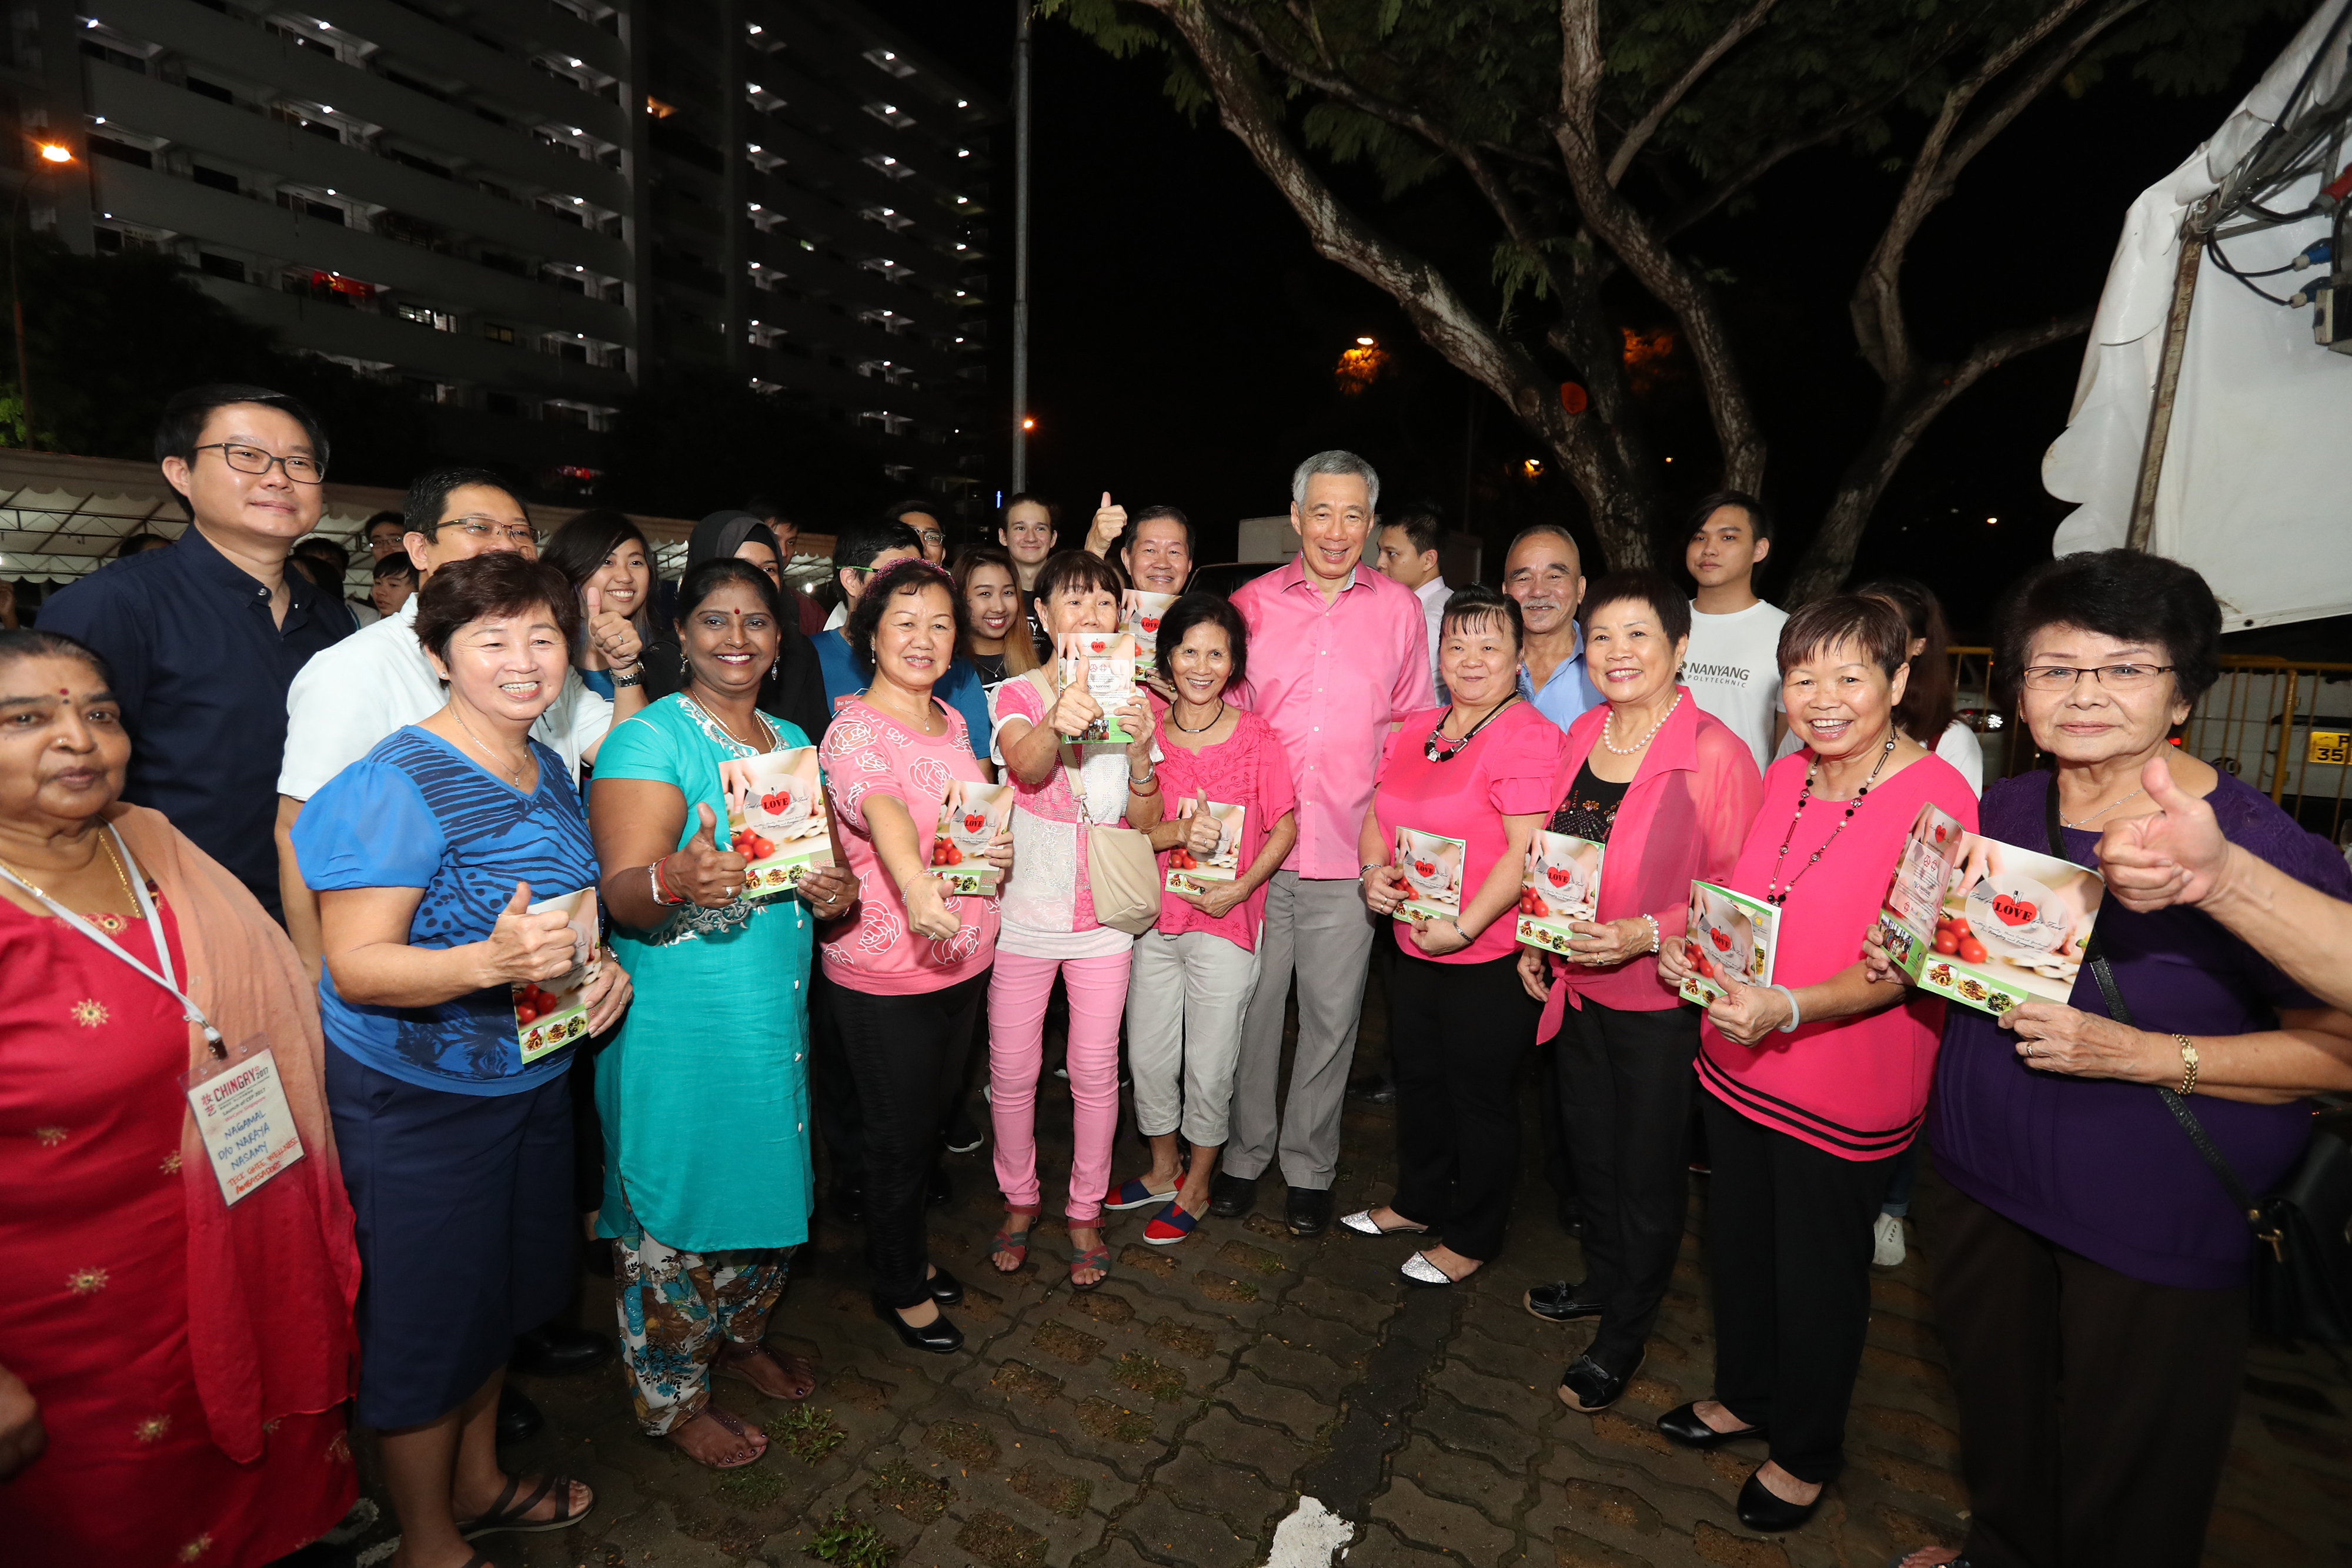 PM Lee Hsien Loong at Teck Ghee Active Ageing Night 2016